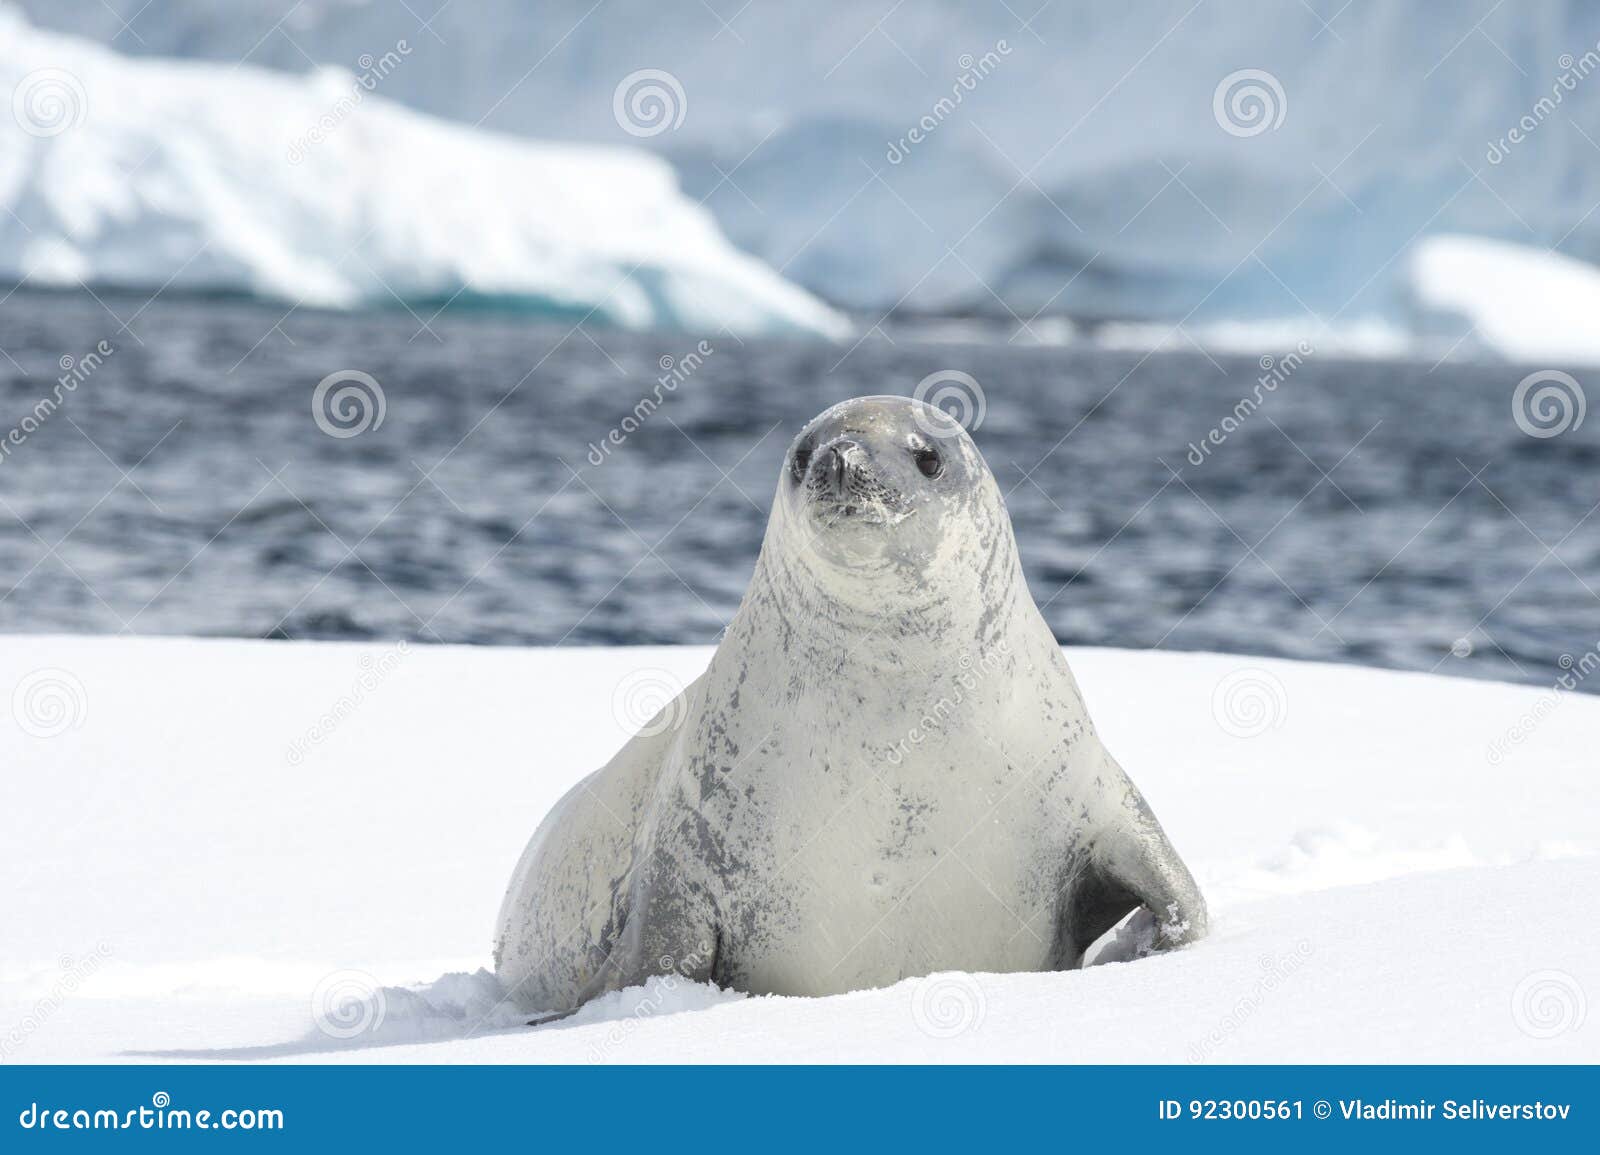 crabeater seal on the ice.